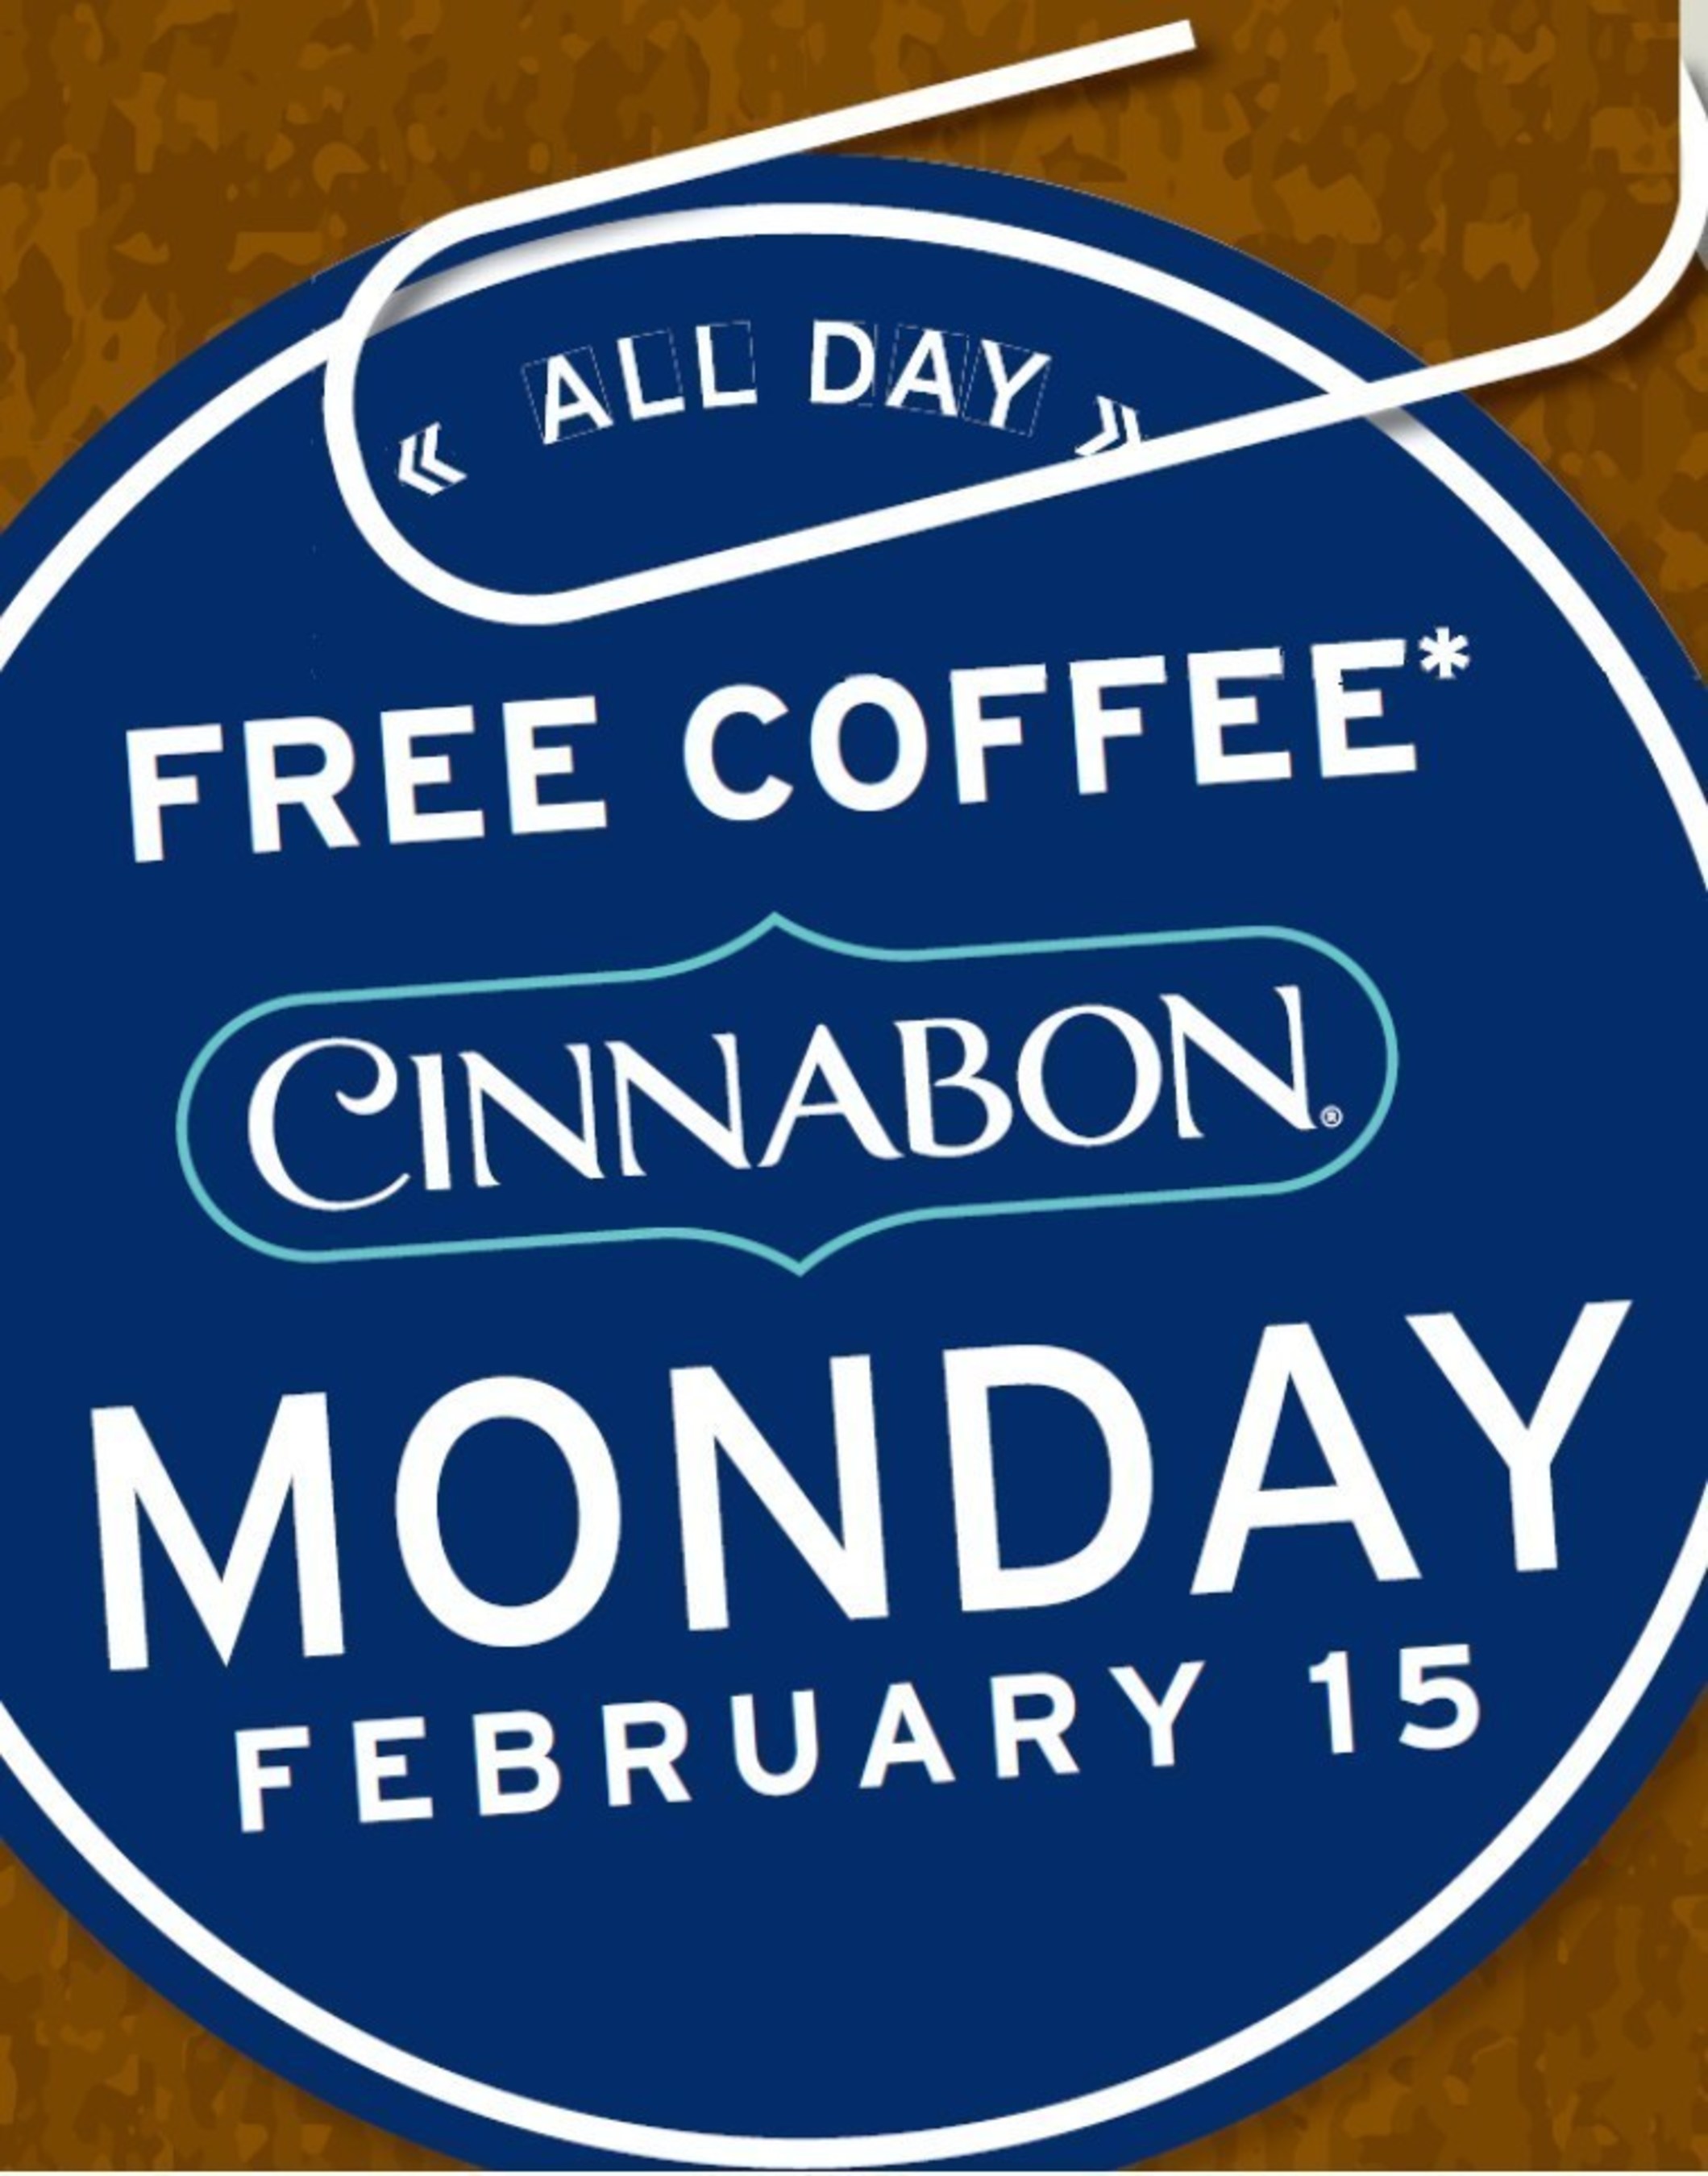 In celebration of the season premiere of Better Call Saul, fans can enjoy a FREE cup of coffee at Cinnabon on  Monday, February 15th, 2016